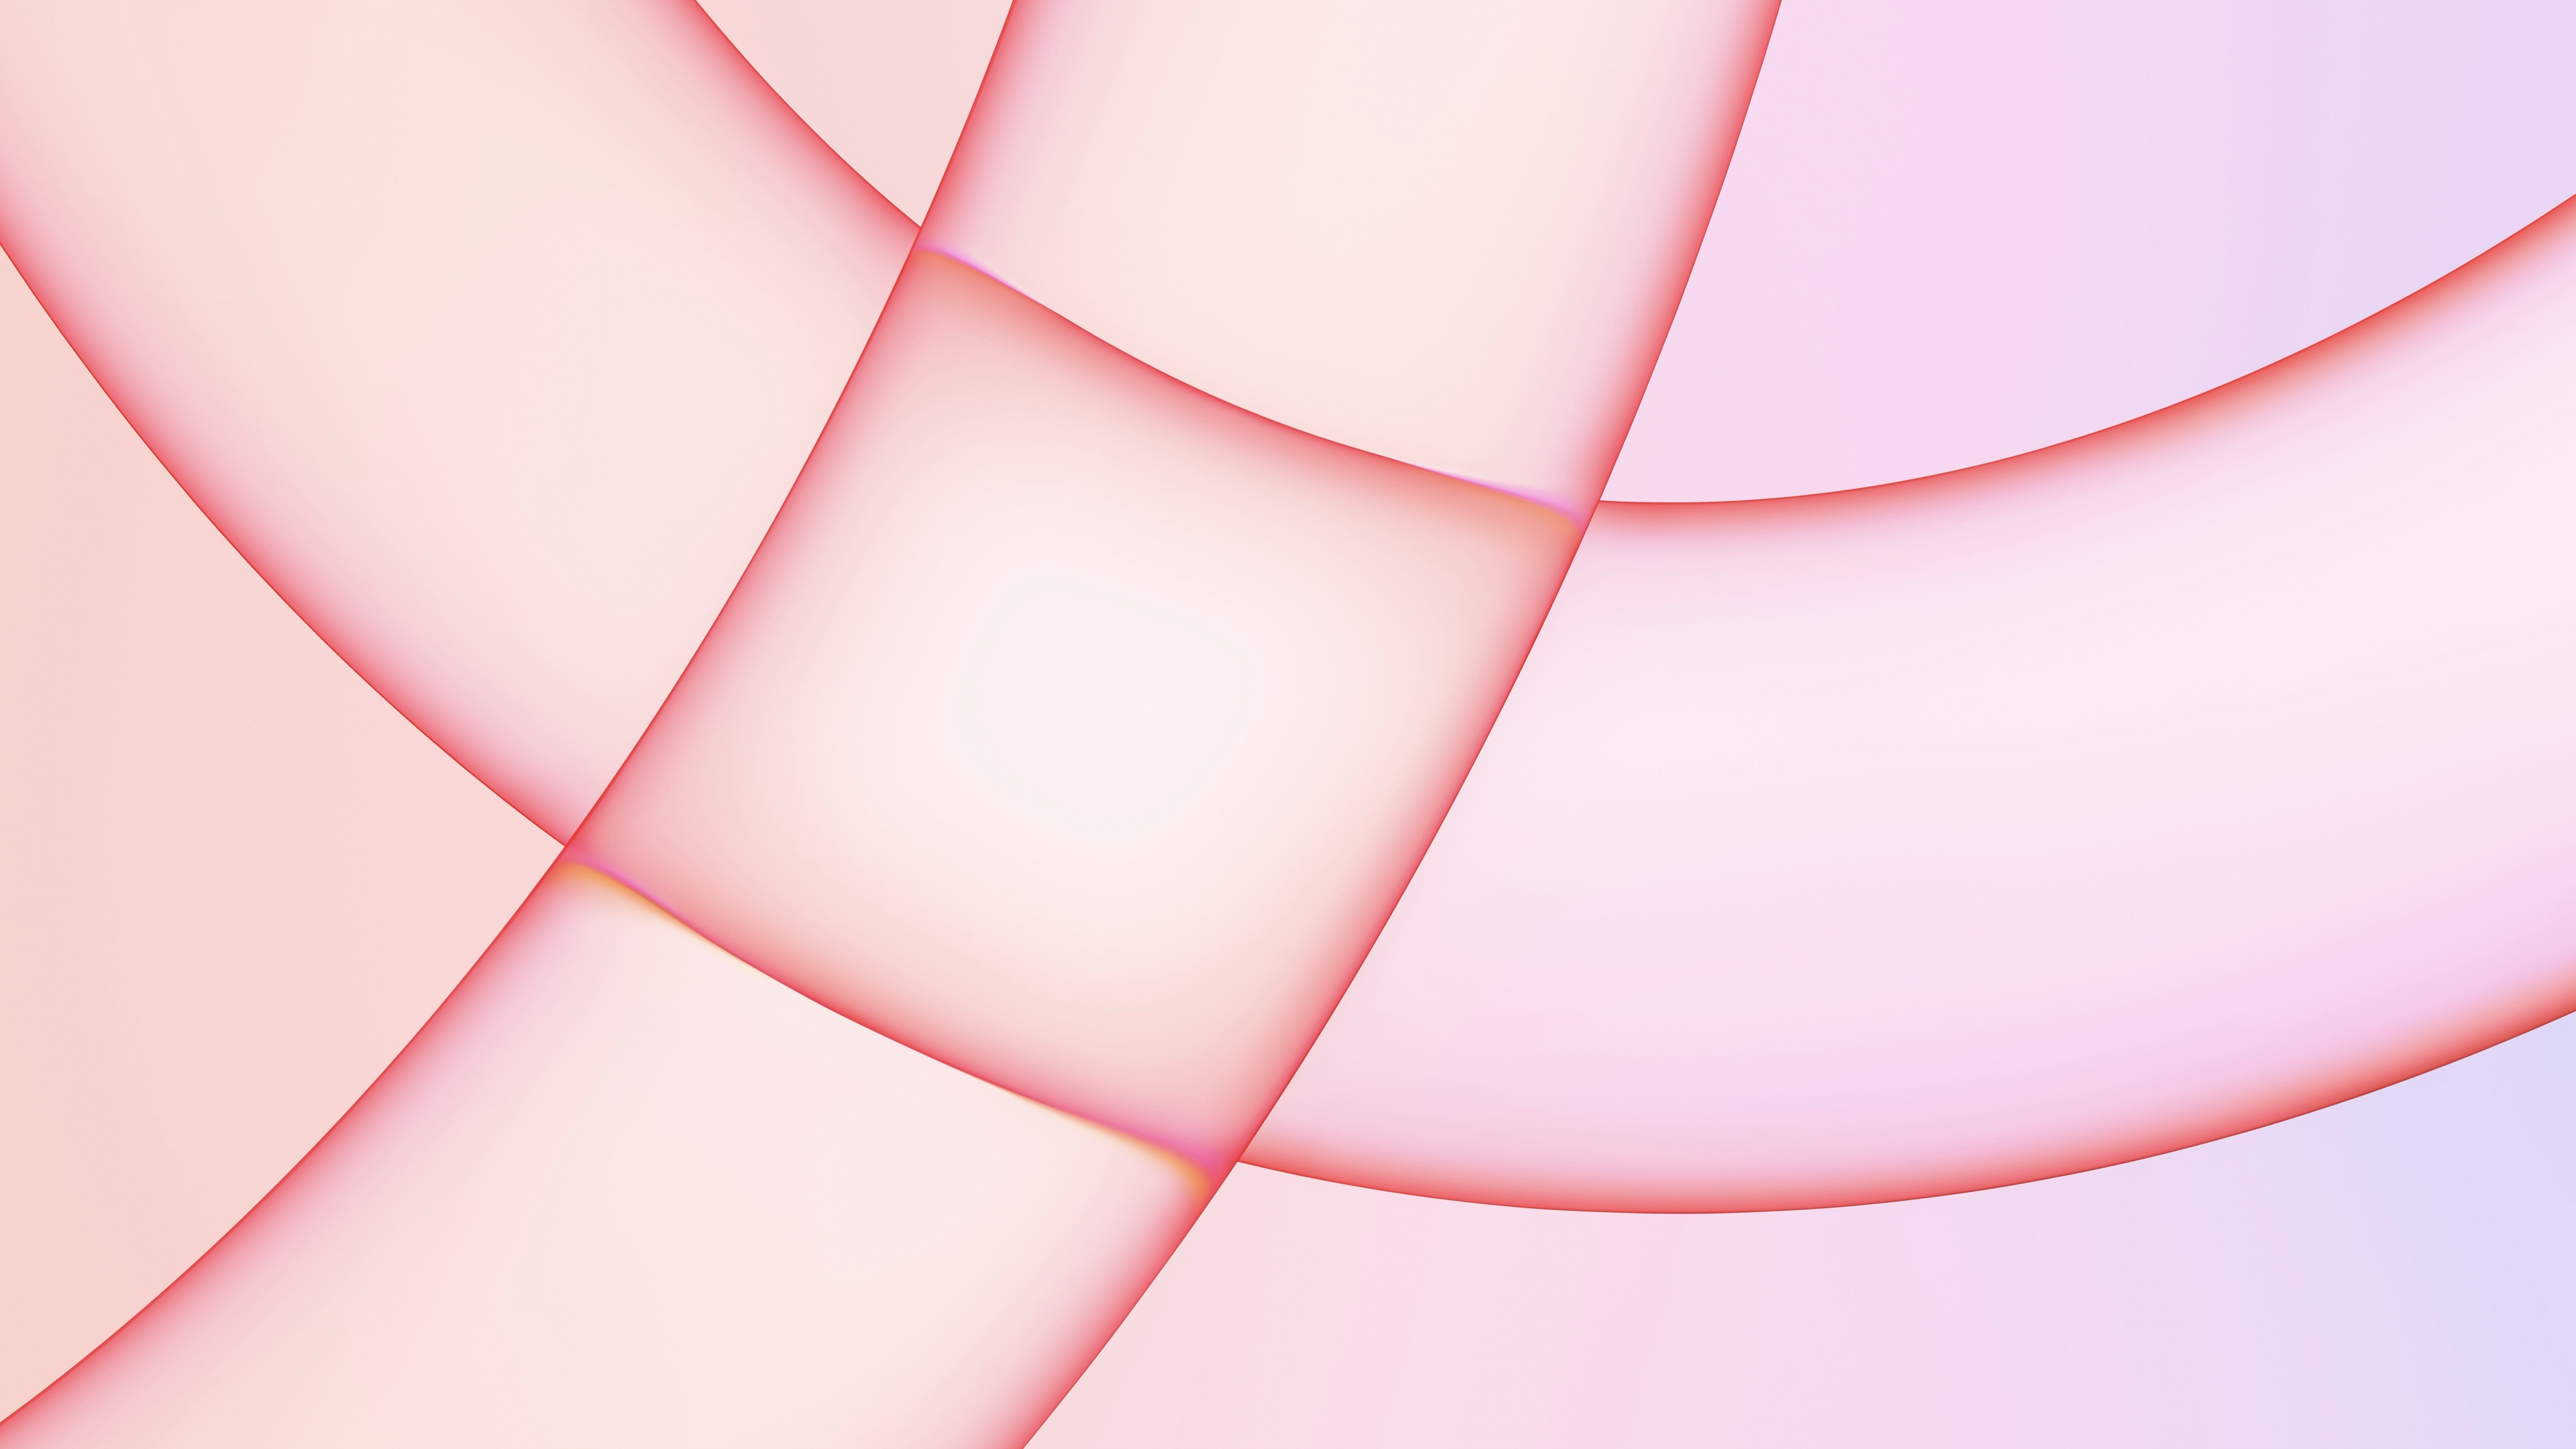 Imac 21 Wallpaper 4k Apple Event 21 Stock Pink Background 5k Abstract 5249